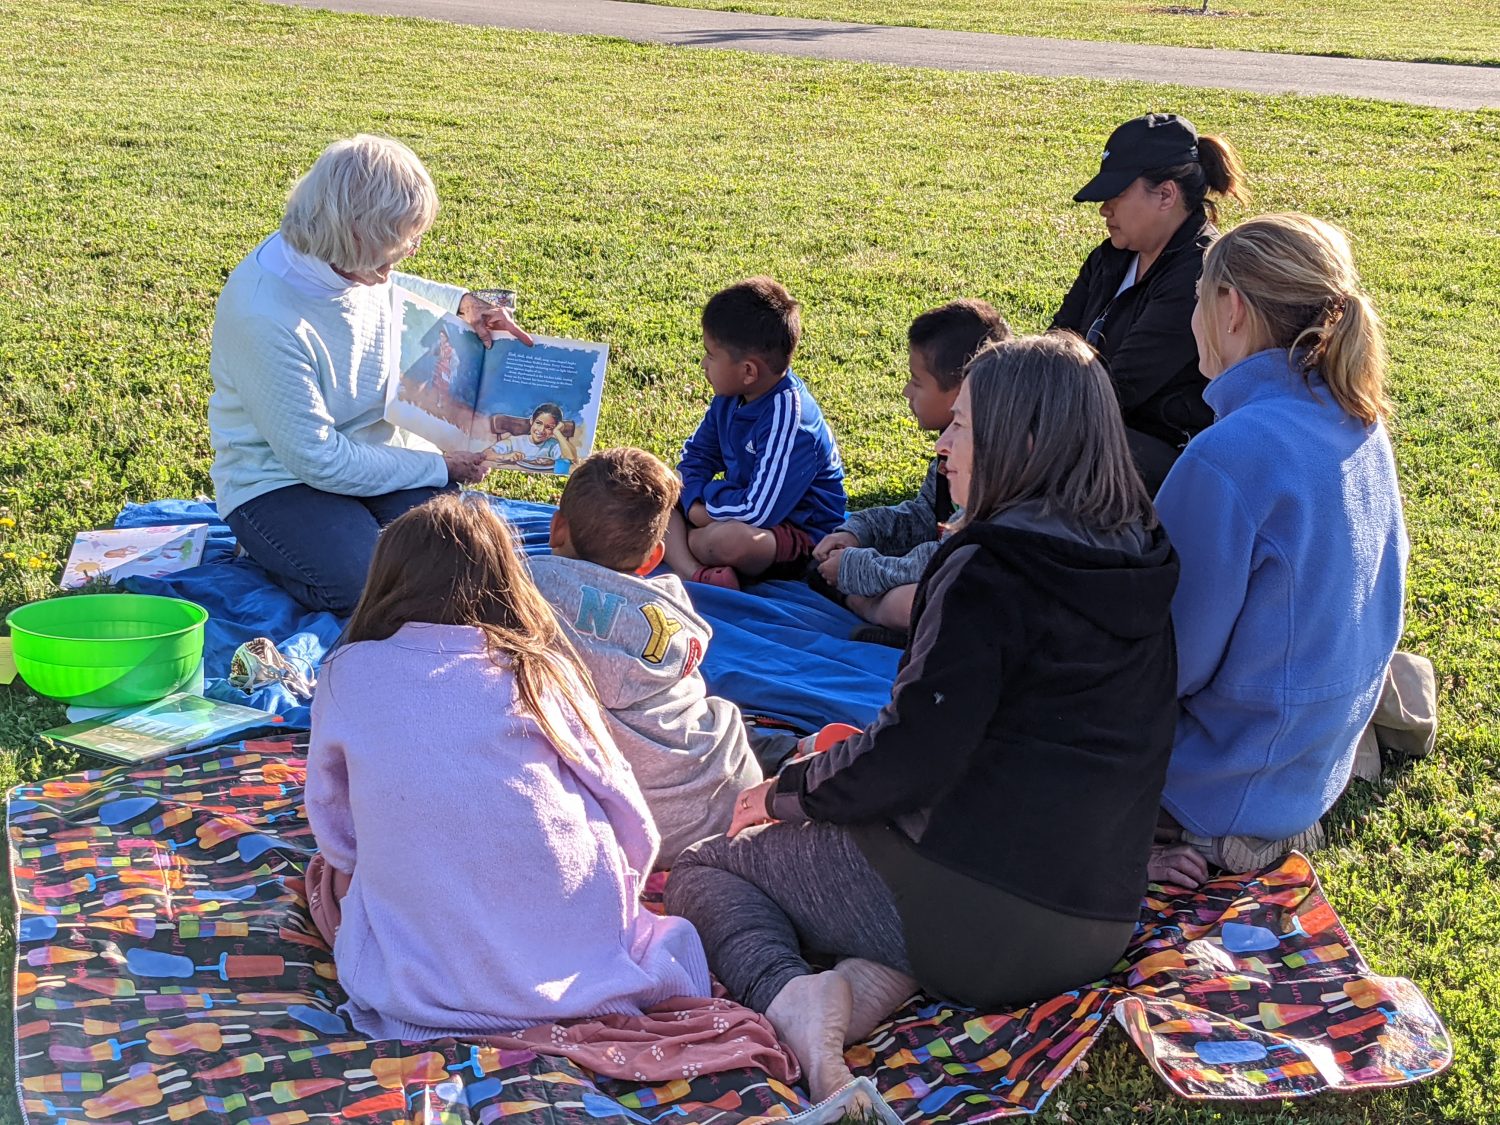 Tuesday evenings are Diversity Storytime in Merrill